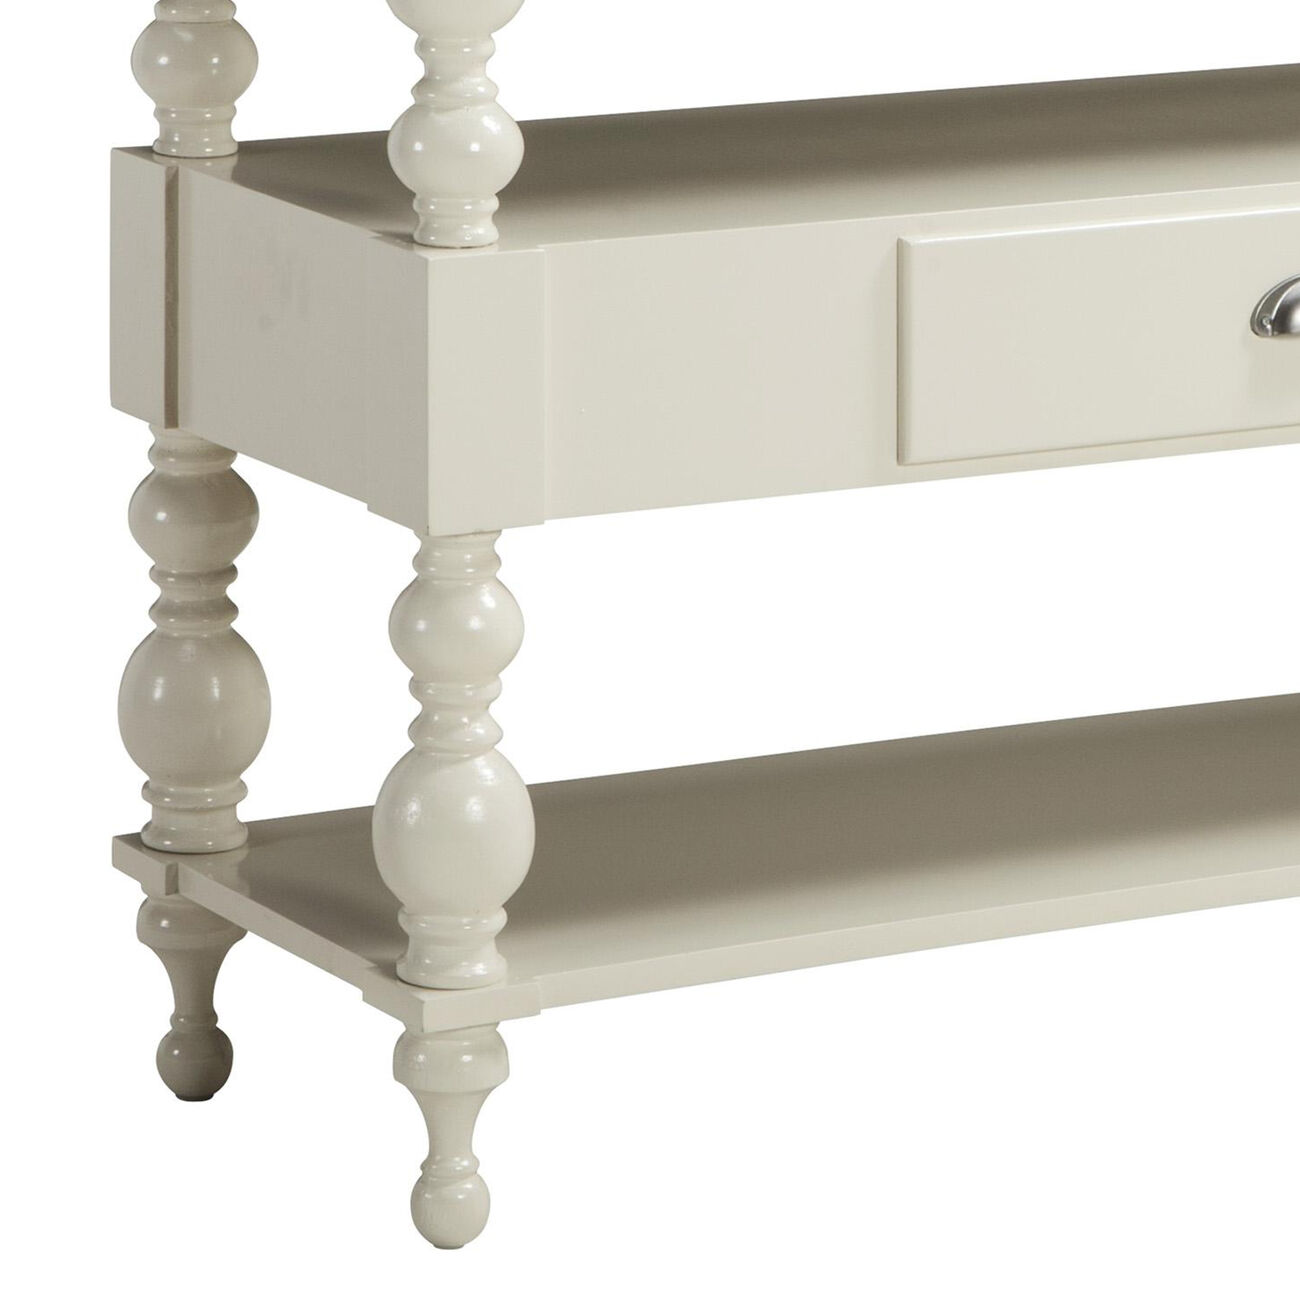 1 Drawer and 2 Shelves Wooden Console Table with Aluminum Top,Gray and White